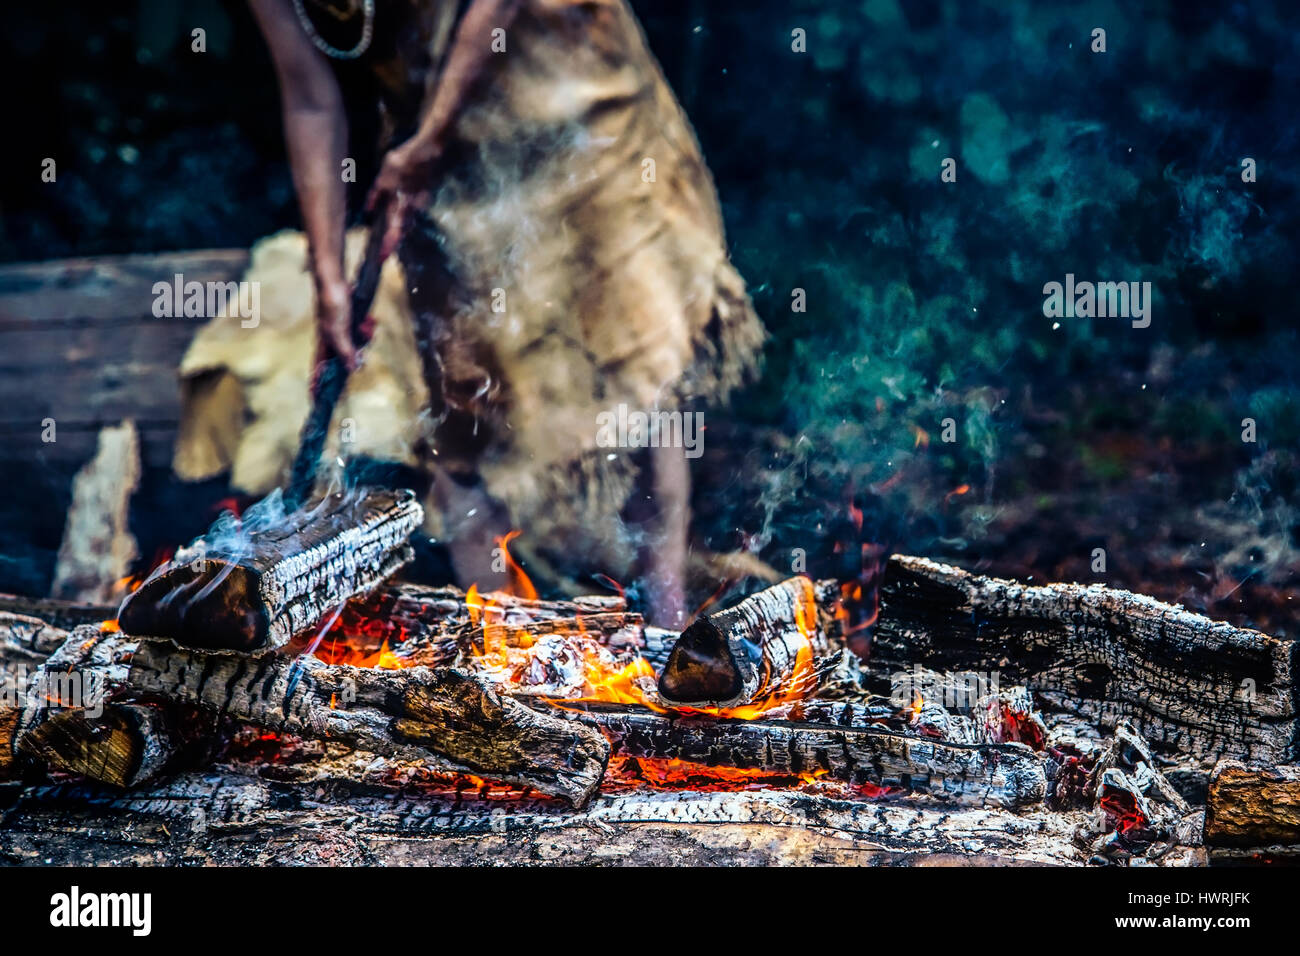 A bed of hot coals with a  Native American woman in the background. Stock Photo